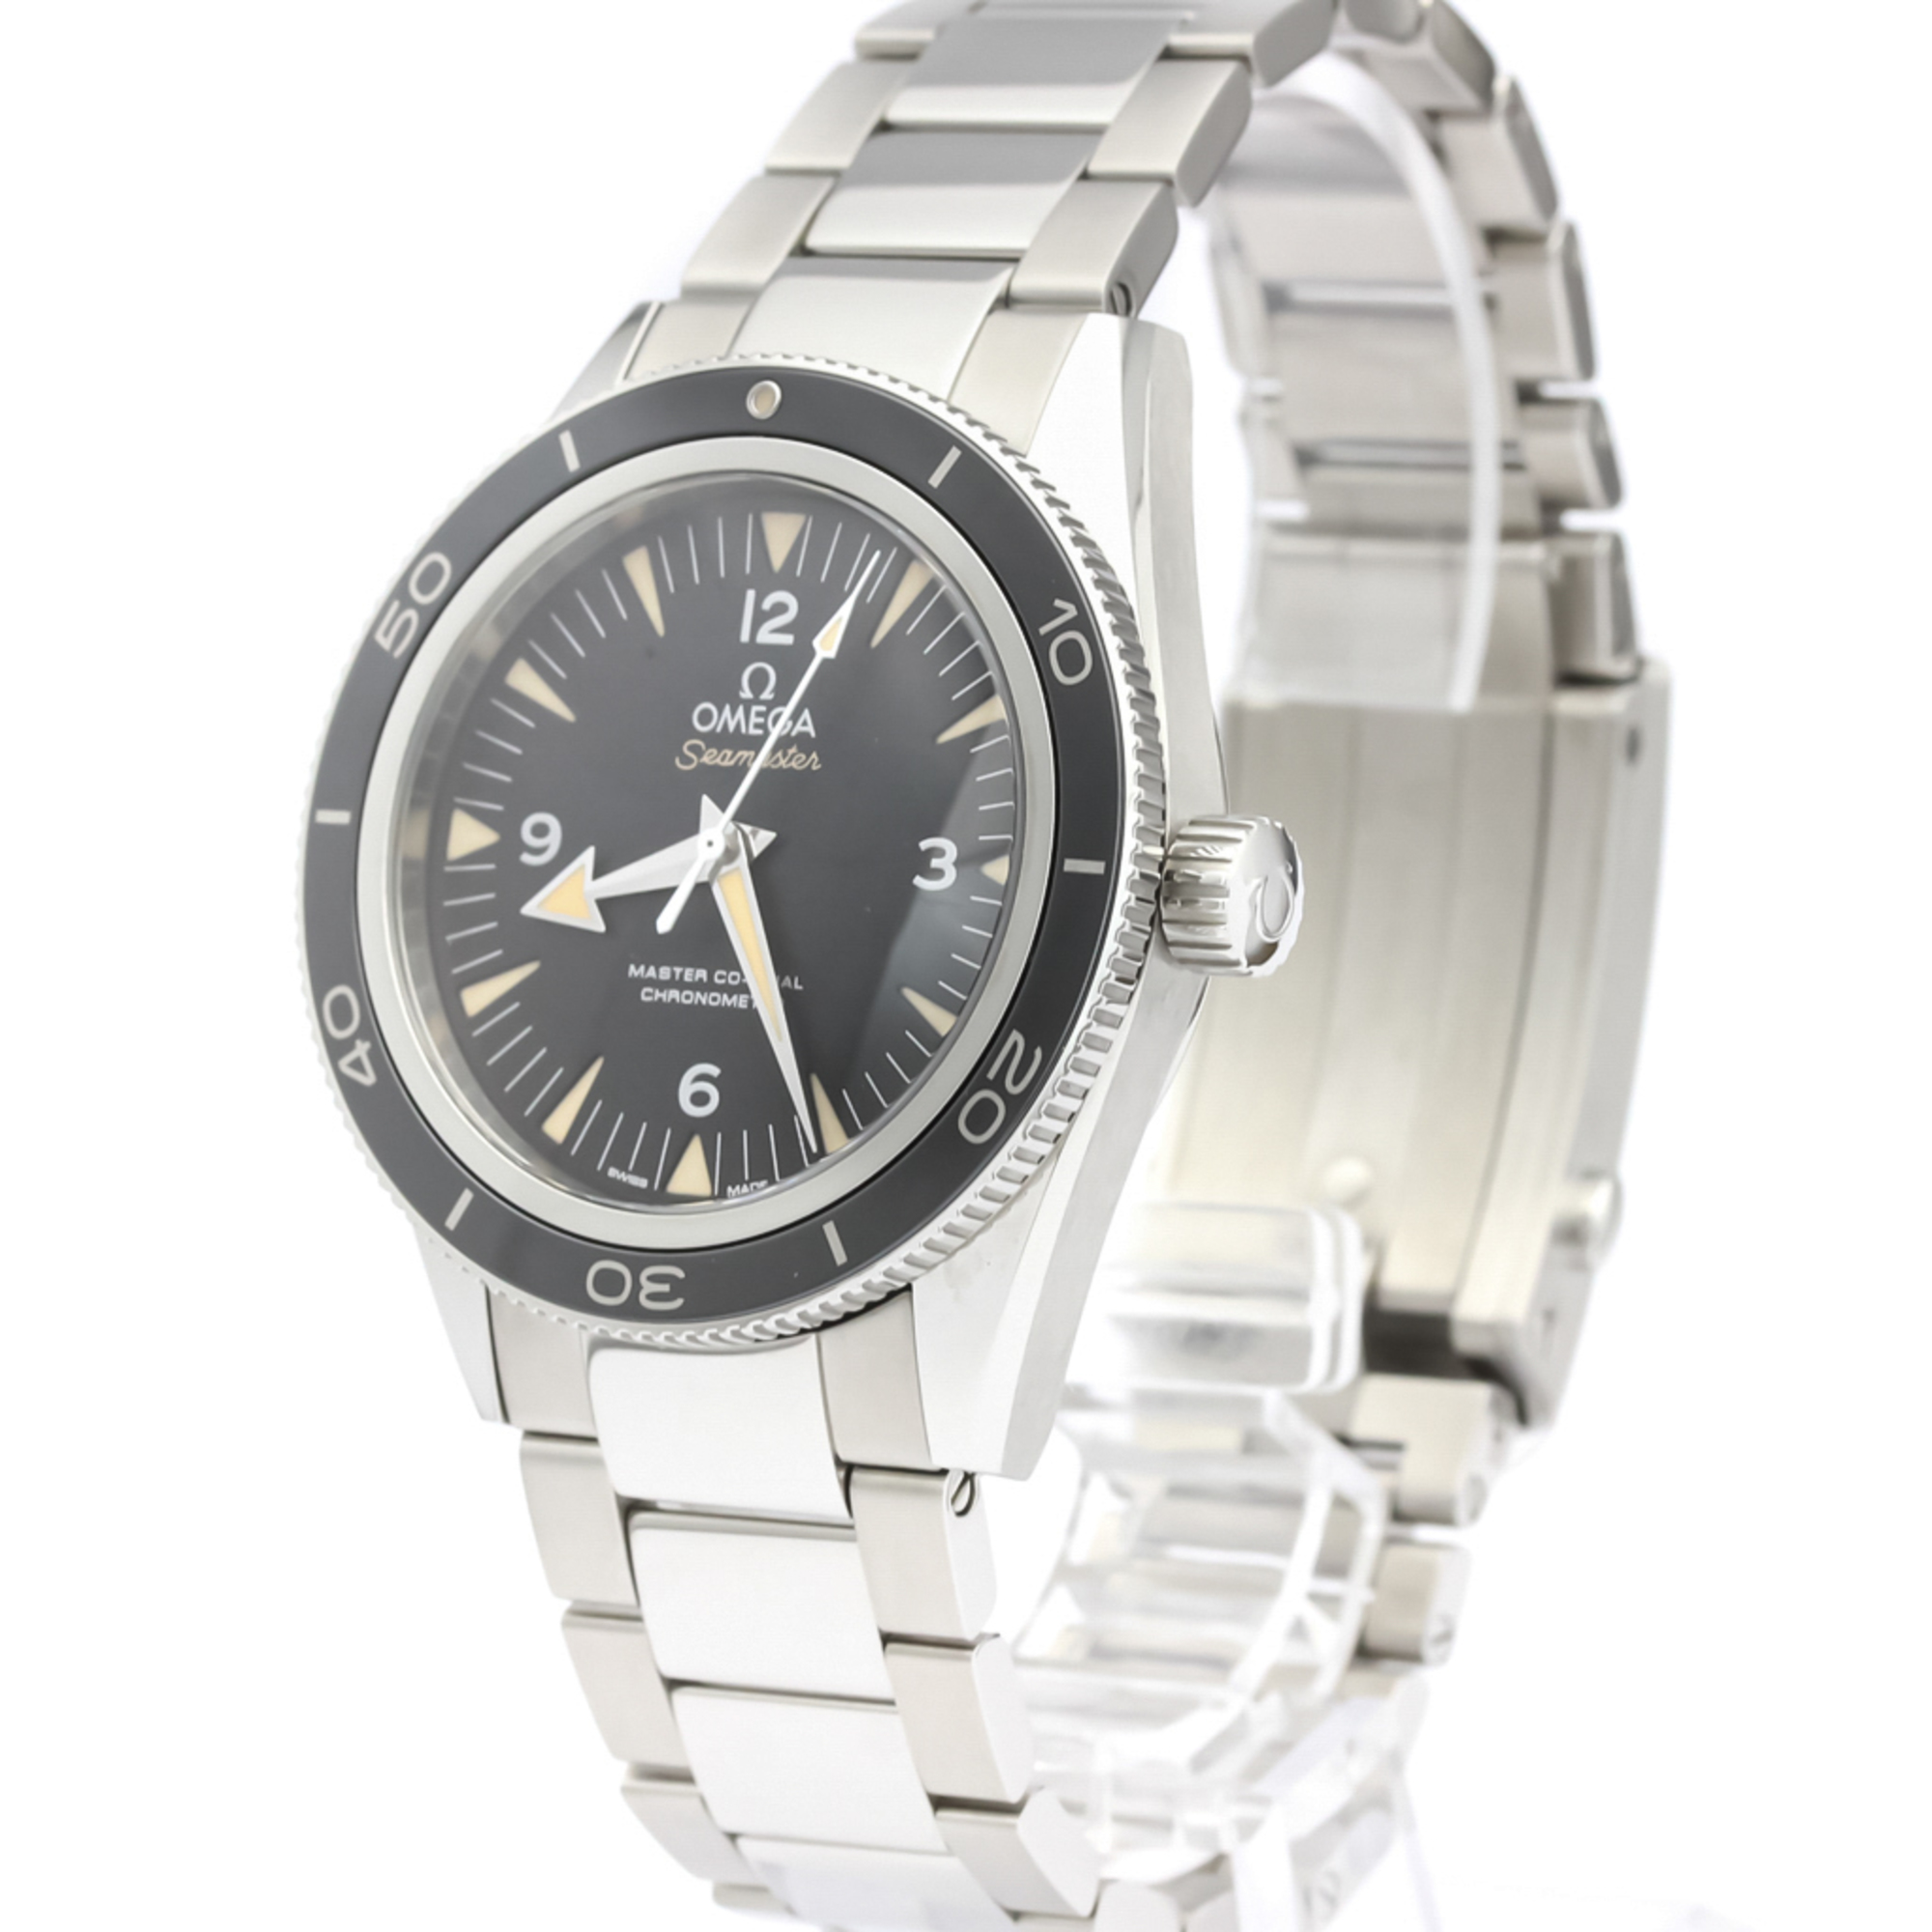 Omega Seamaster Automatic Stainless Steel Men's Sports Watch 233.30.41.21.01.001